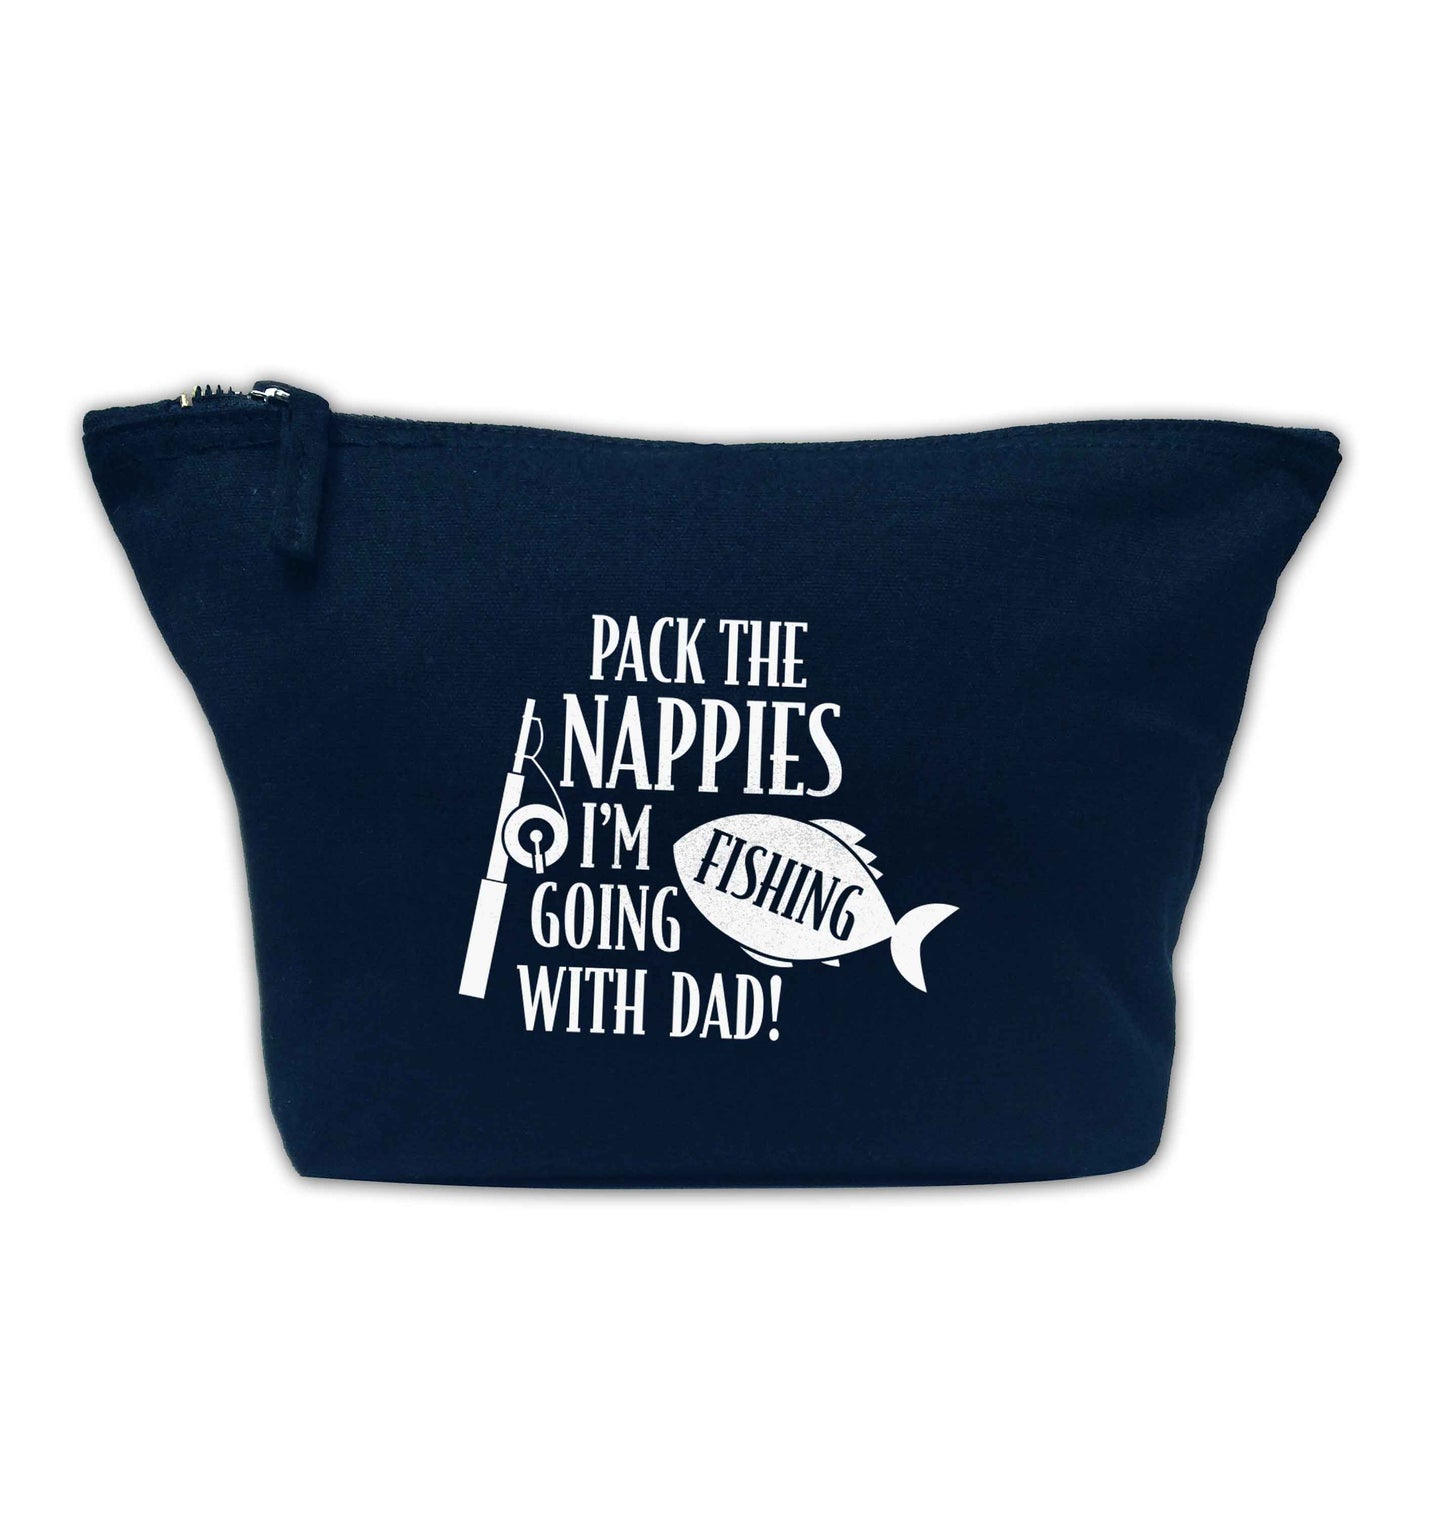 Pack the nappies I'm going fishing with Dad navy makeup bag